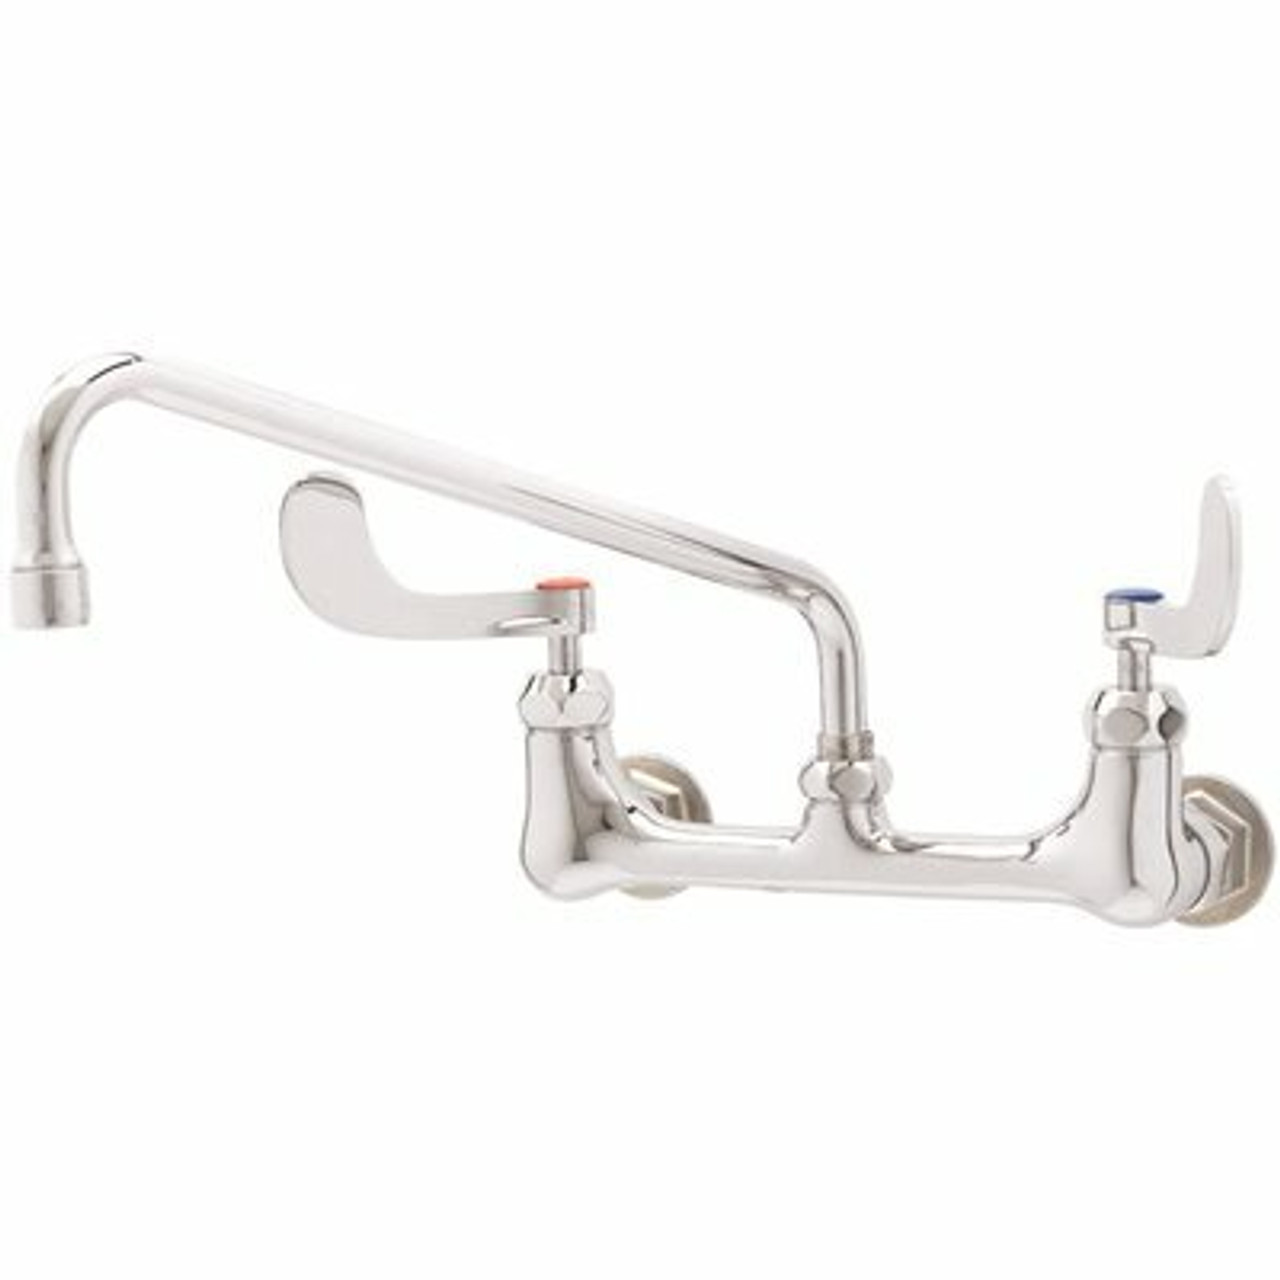 T&S Commercial 2-Handle Kitchen Faucet With Wrist Blade Handles In Polished Chrome - 274035